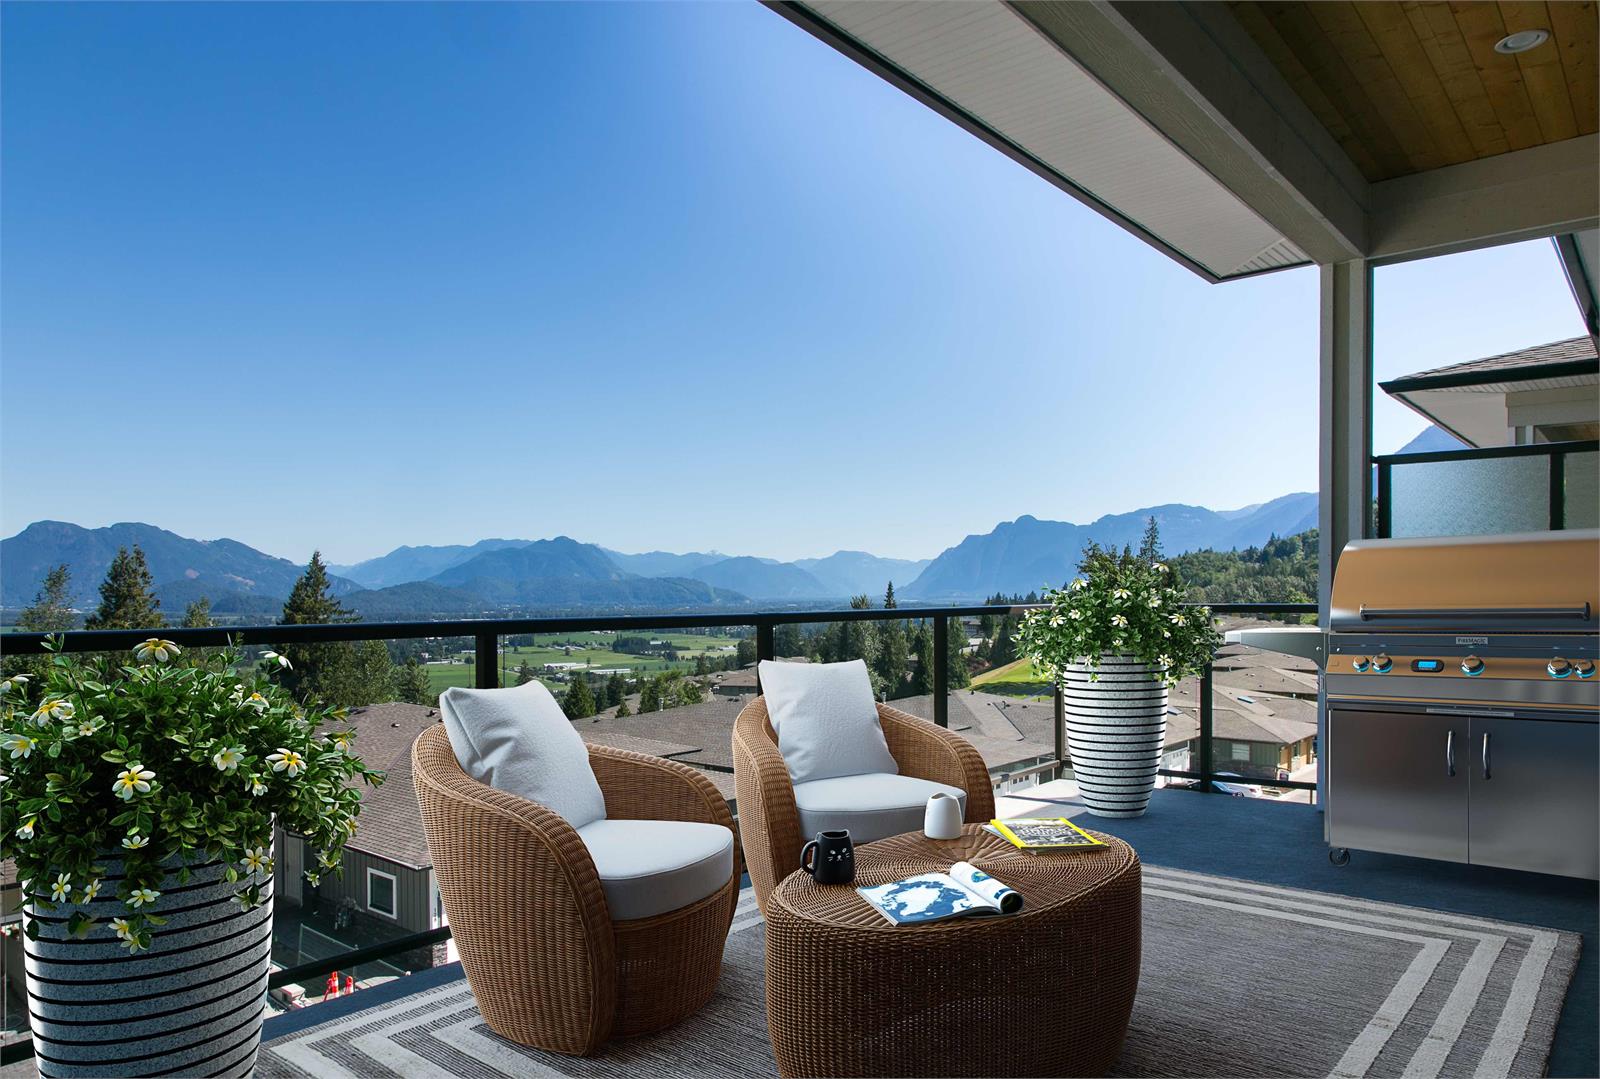 Extend your living area with spacious decks to enjoy outdoor dining with a spectacular view.